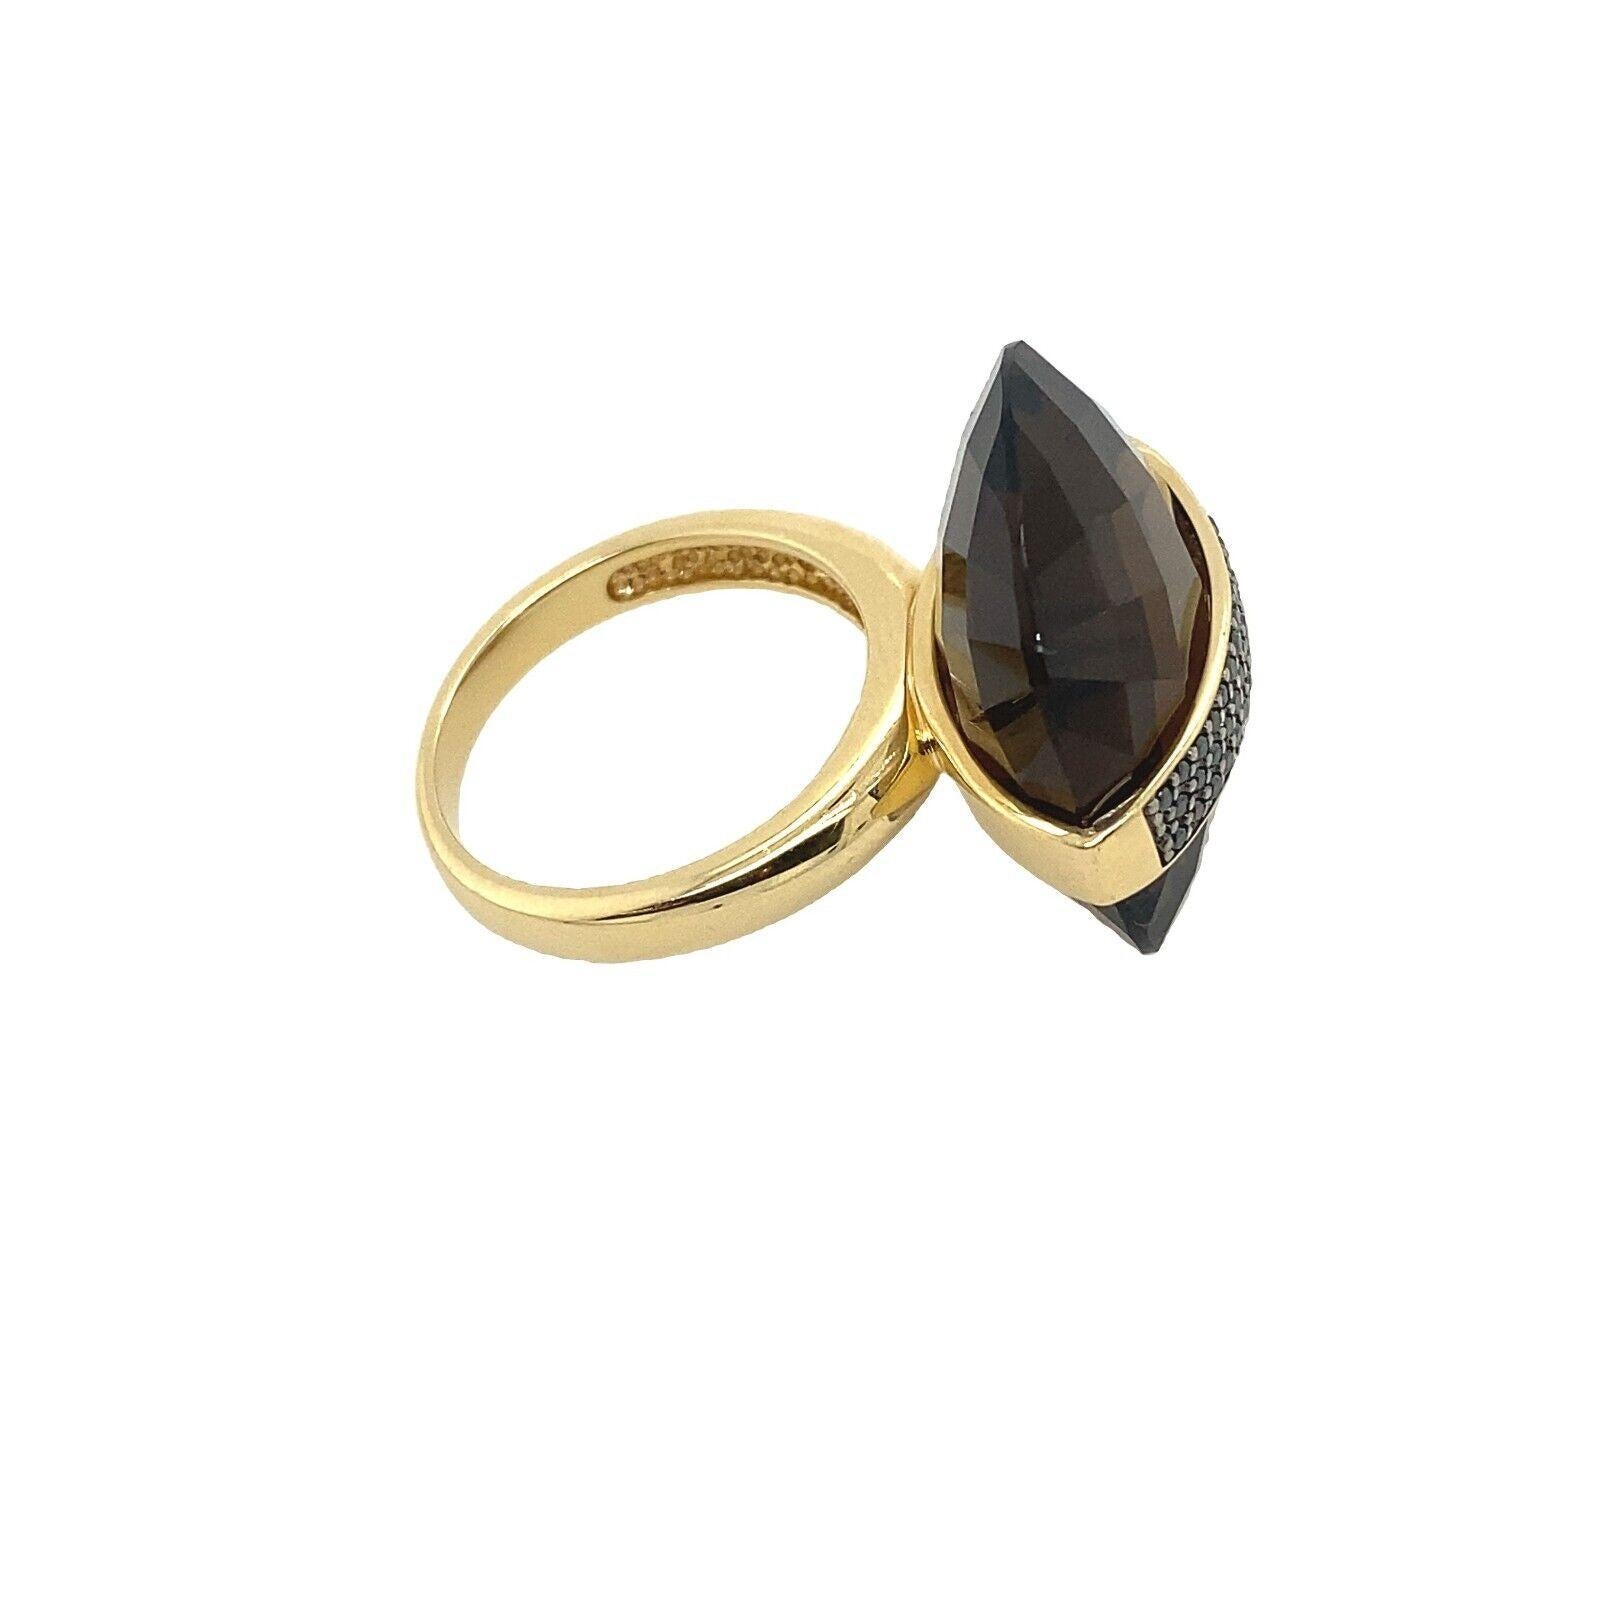 A delicate Smoky Quartz ring set in a 14ct yellow gold band. The Smoky Quartz is a beautiful stone that is translucent and has a very soft sheen, set with 0.50ct Black Diamonds. The stone is set in a delicate 14ct Yellow Gold band.

Additional